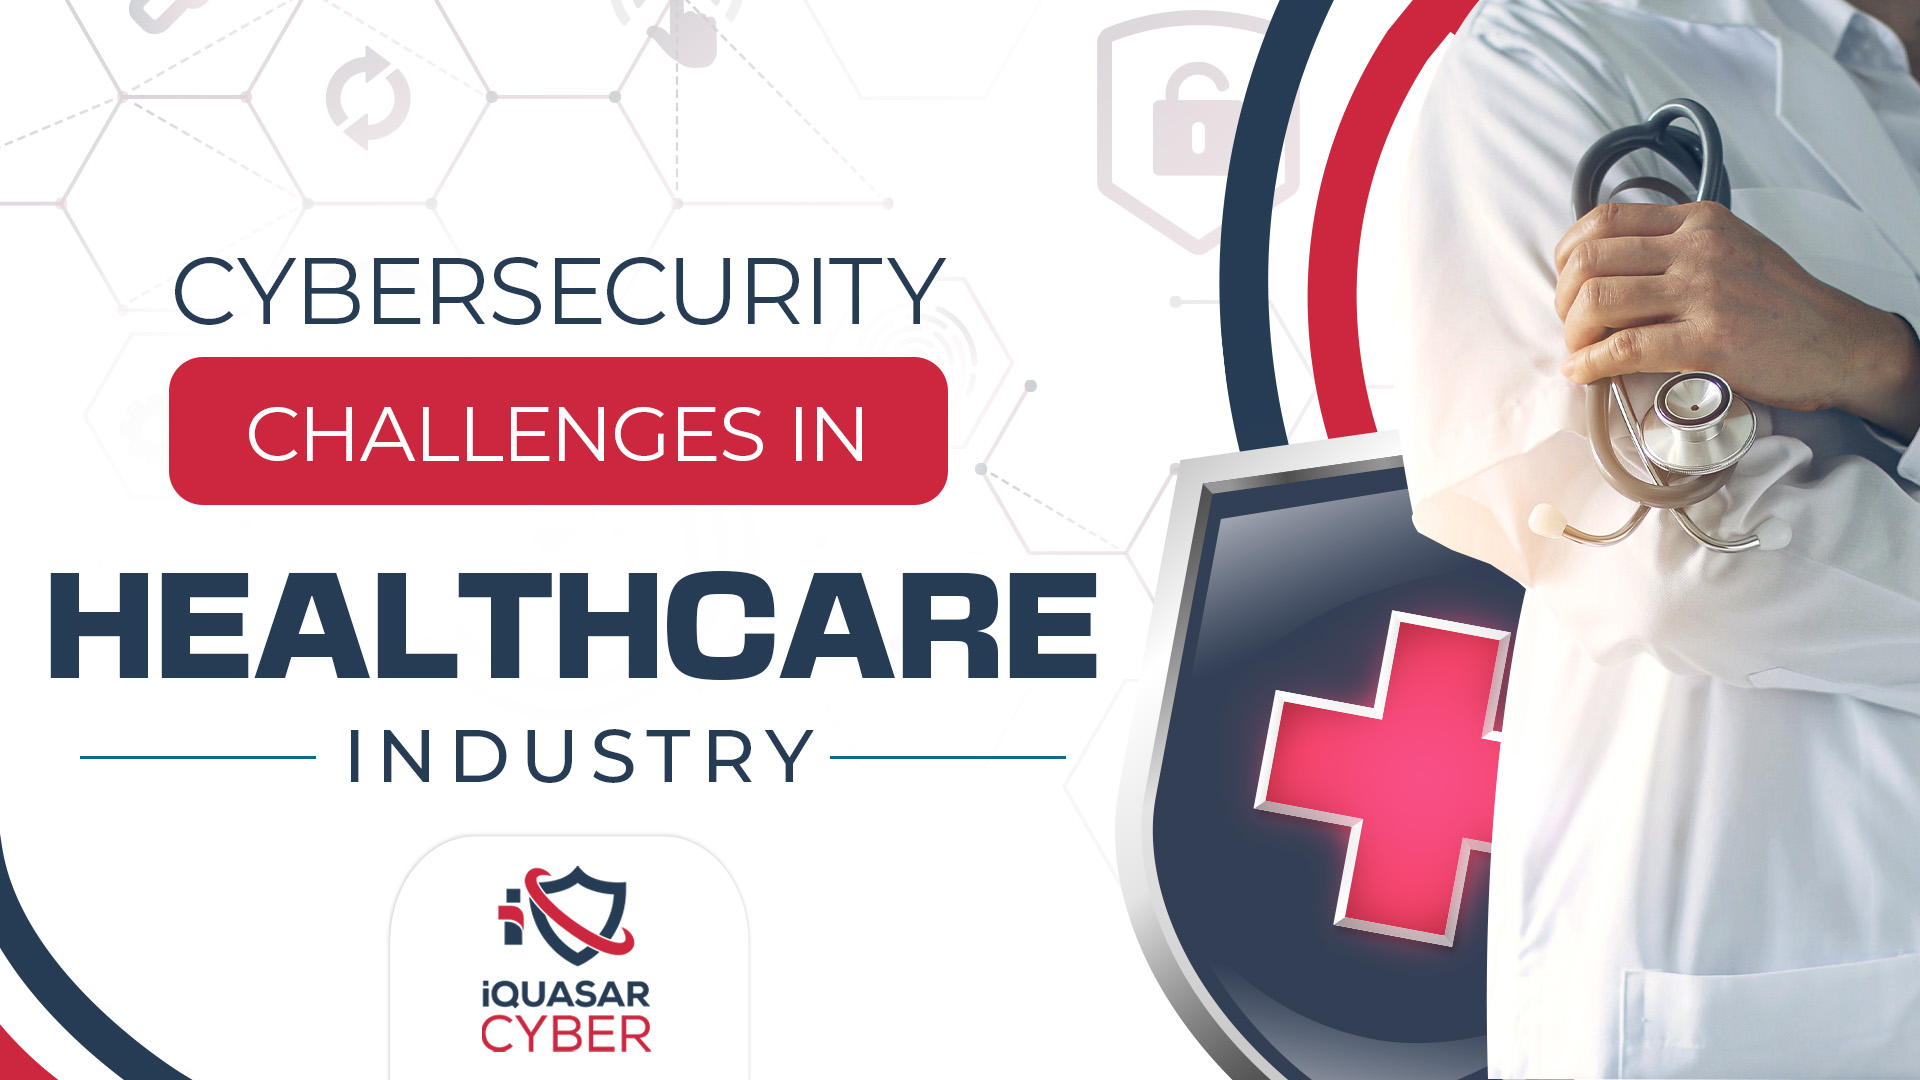 Cybersecurity challenges | iQuasar Cyber